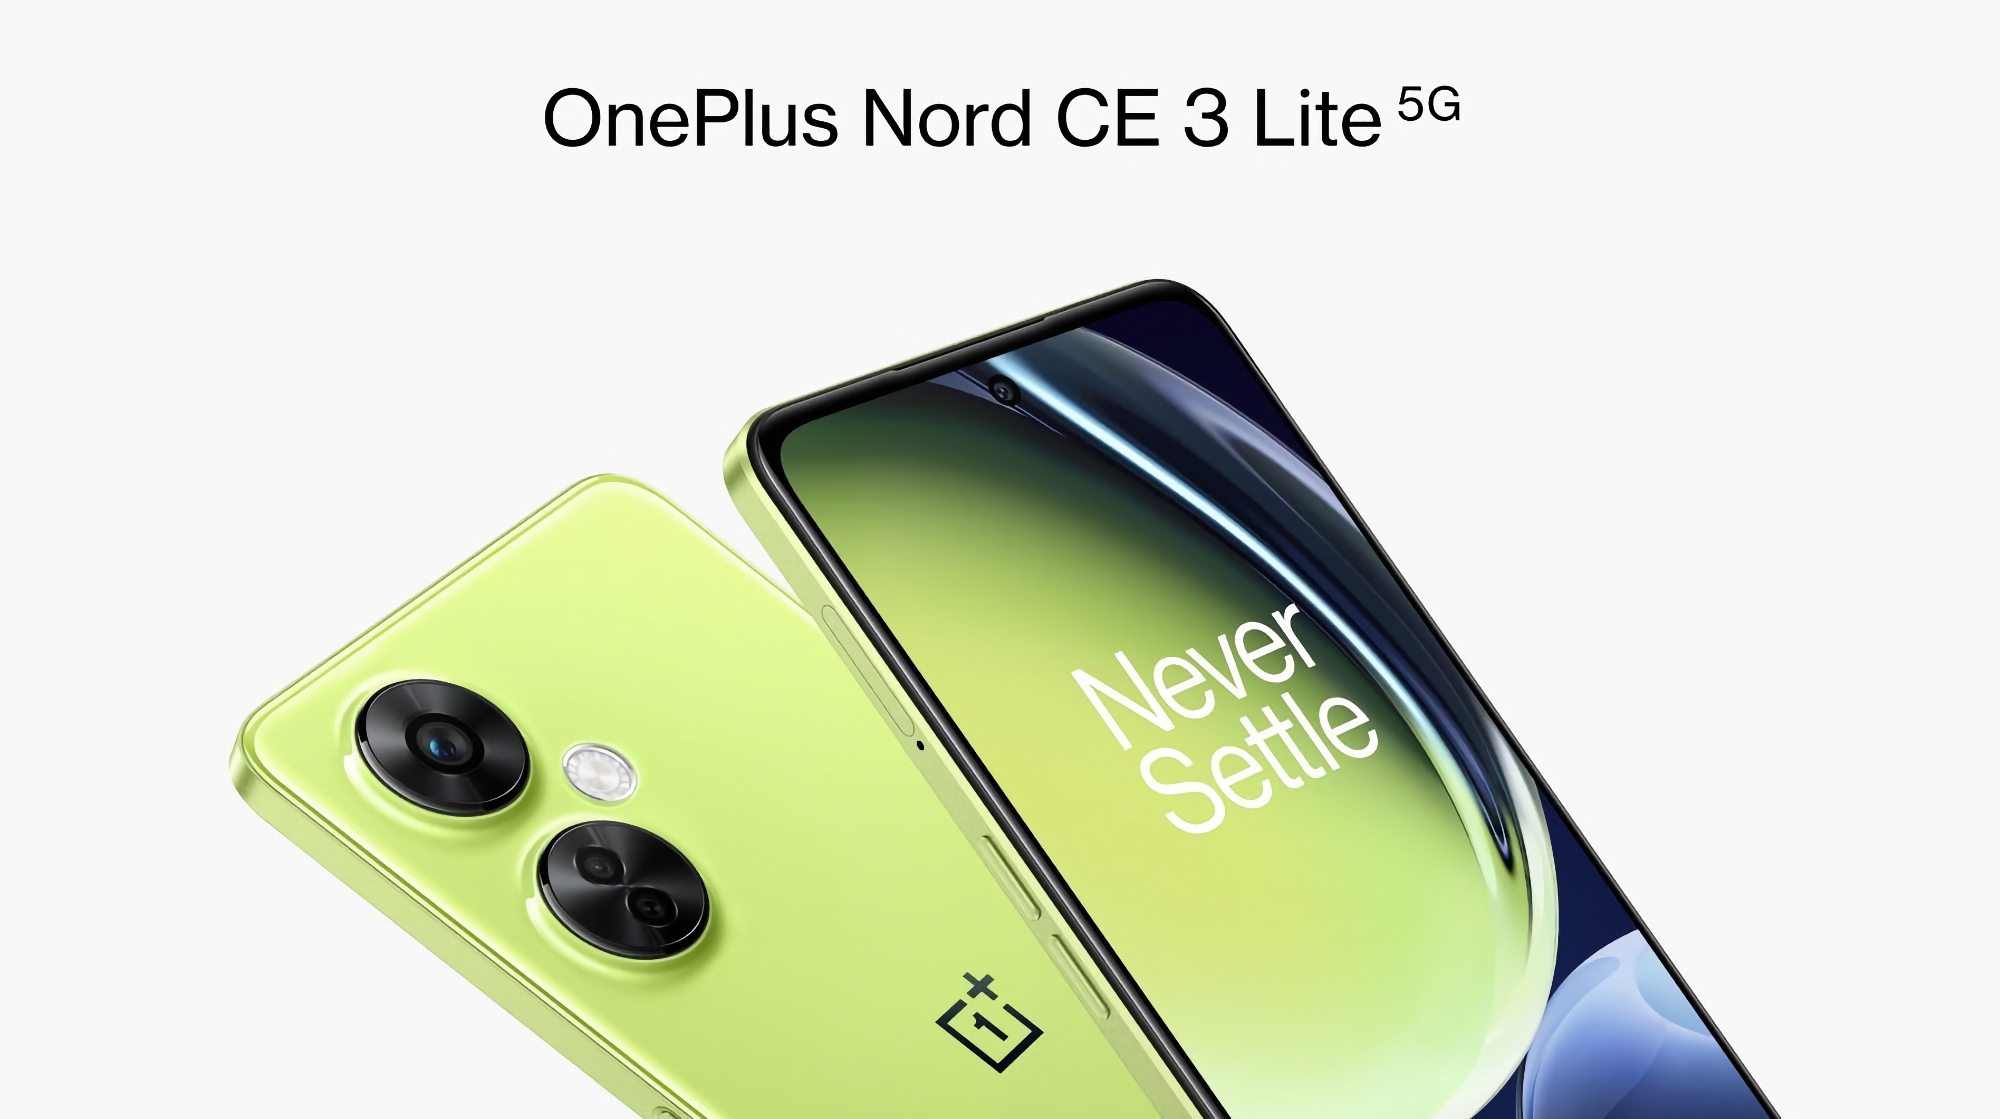 OnePlus Nord CE 3 Lite with 120Hz screen, Snapdragon 695 chip and 108 MP camera will be released in the US under the name OnePlus Nord N30